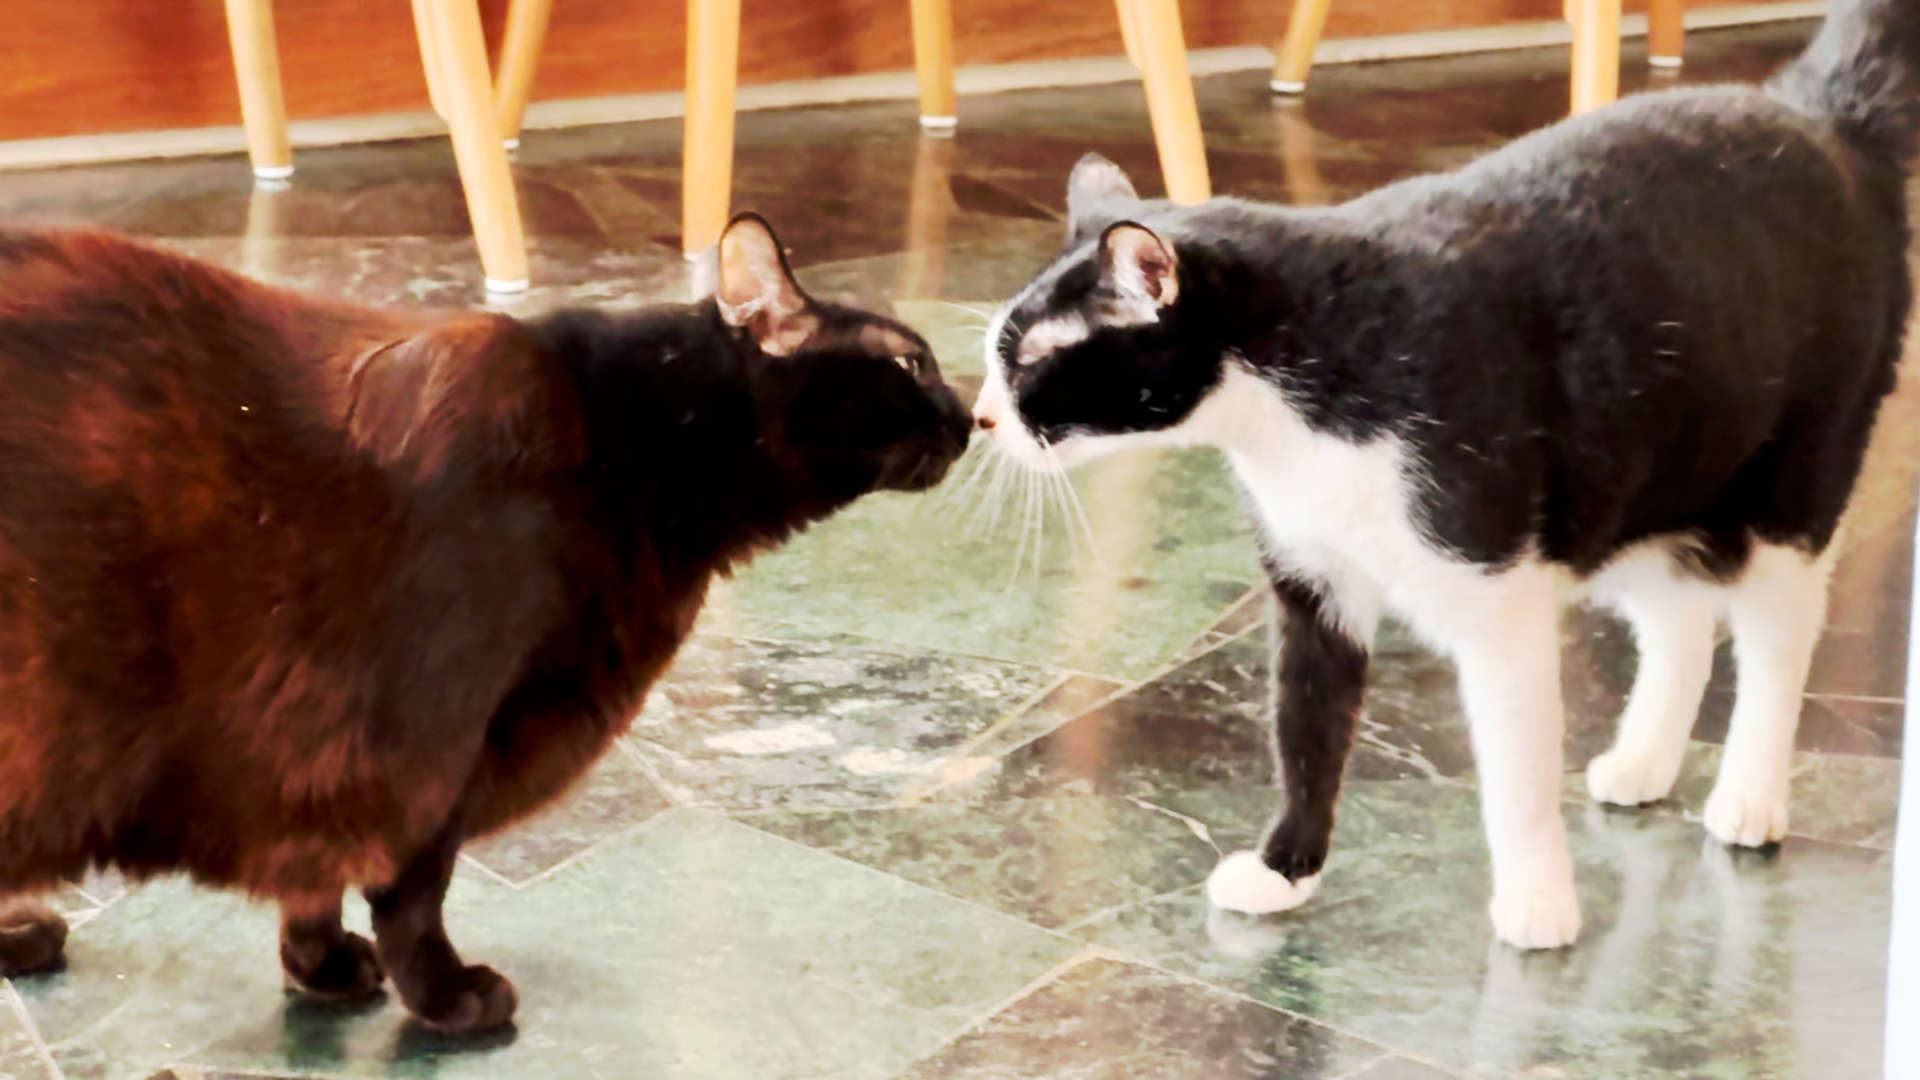 Two cats sniffing each other. Their noses are lightly touching.